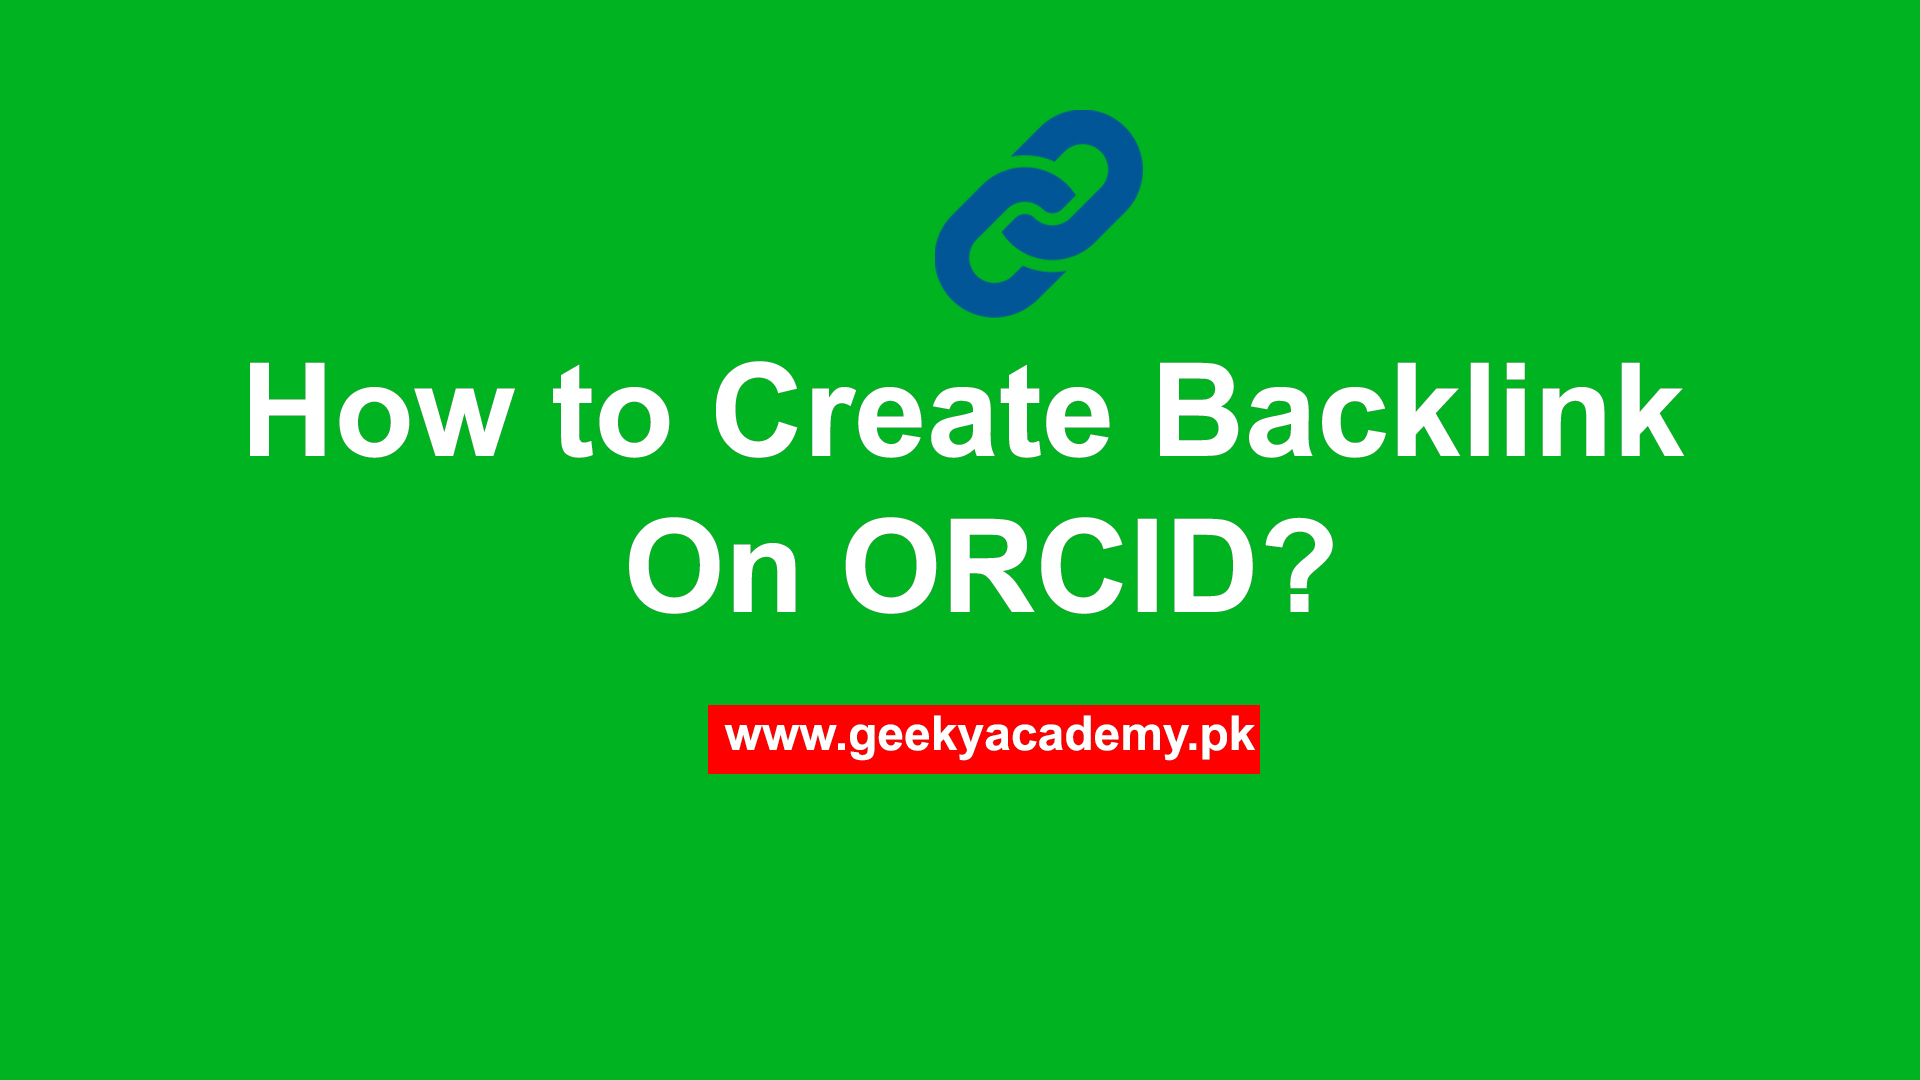 How to Create Backlink on ORCID